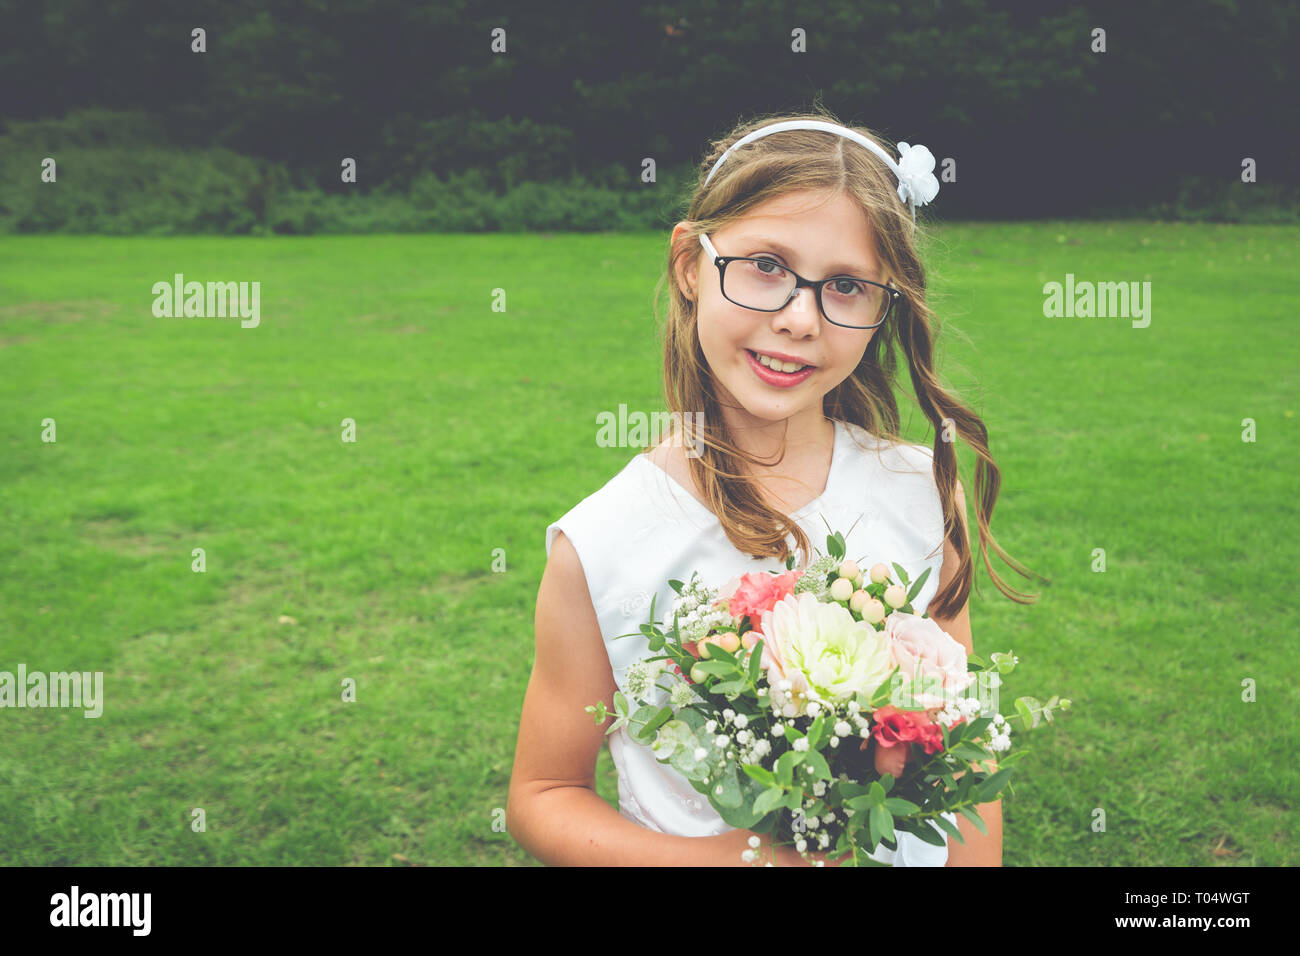 Sweet girl child bridesmaid in white dress and glasses with wildflower and greenery posy - natural shot Stock Photo